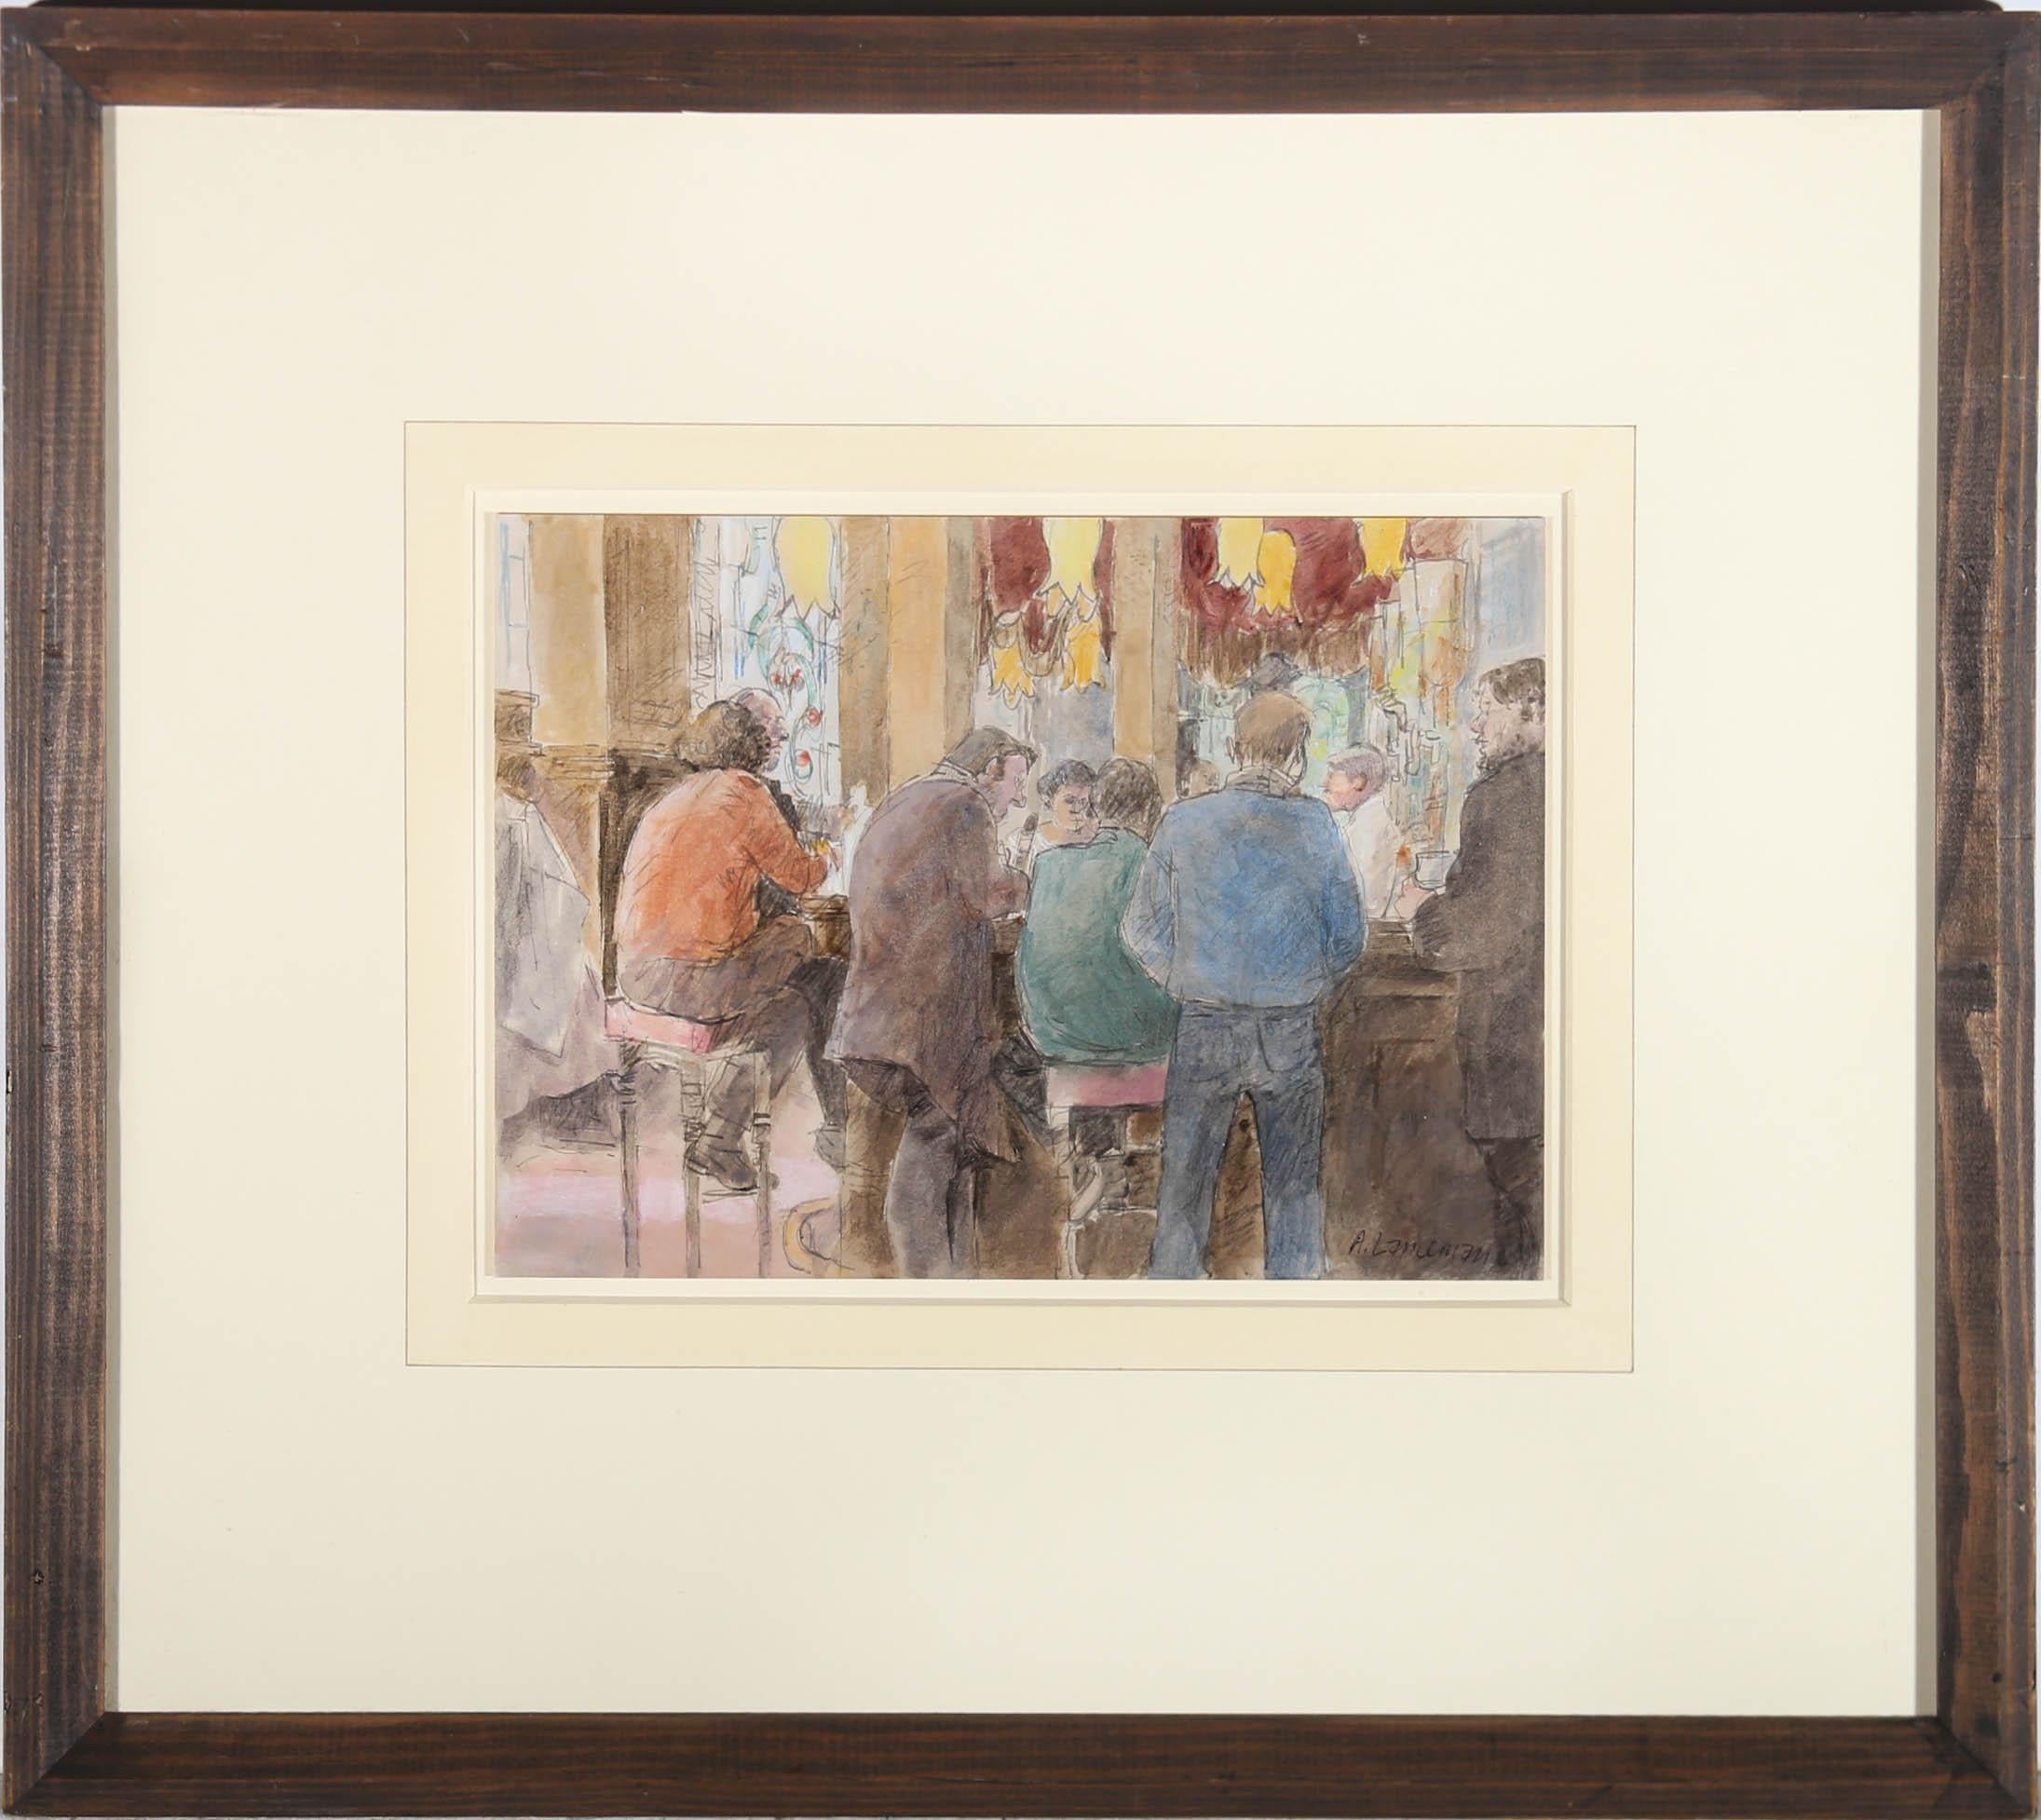 A charming scene depicting a crowded British pub. Signed to the lower right. presented in a dark wooden frame. On paper.
